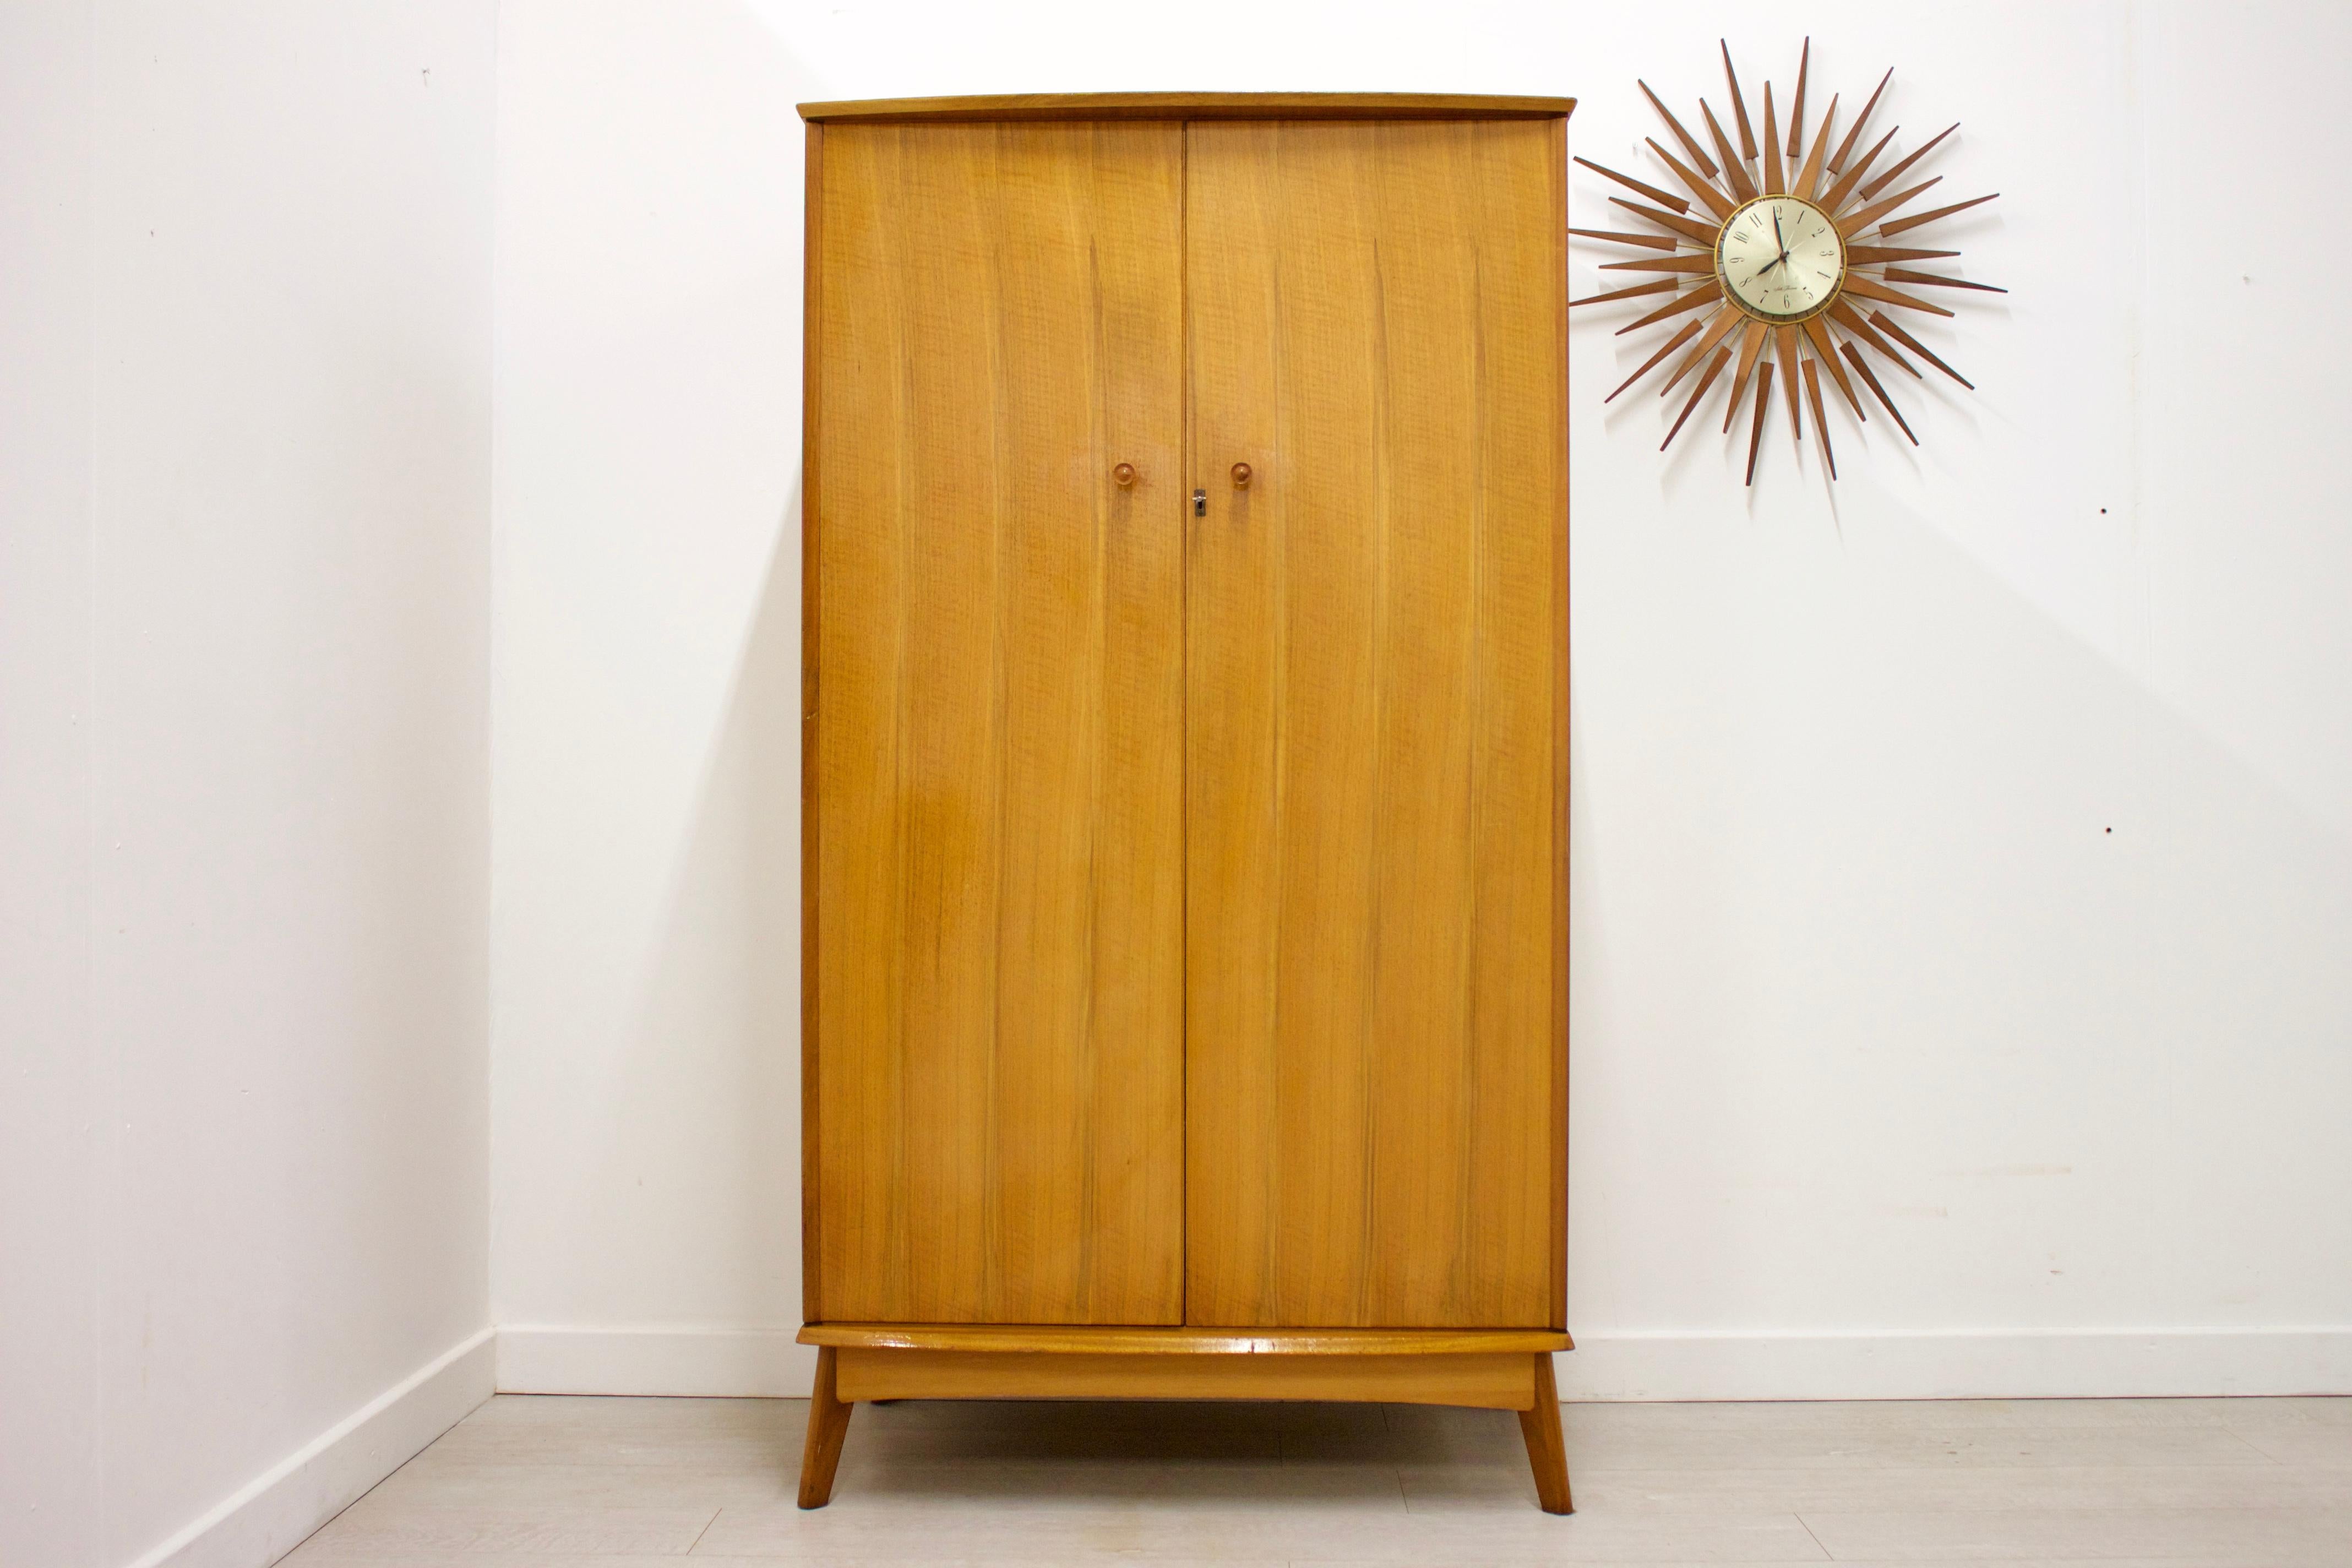 - Mid-Century Modern wardrobe
- Manufactured by Alfred COX
- Made from walnut and walnut veneer.